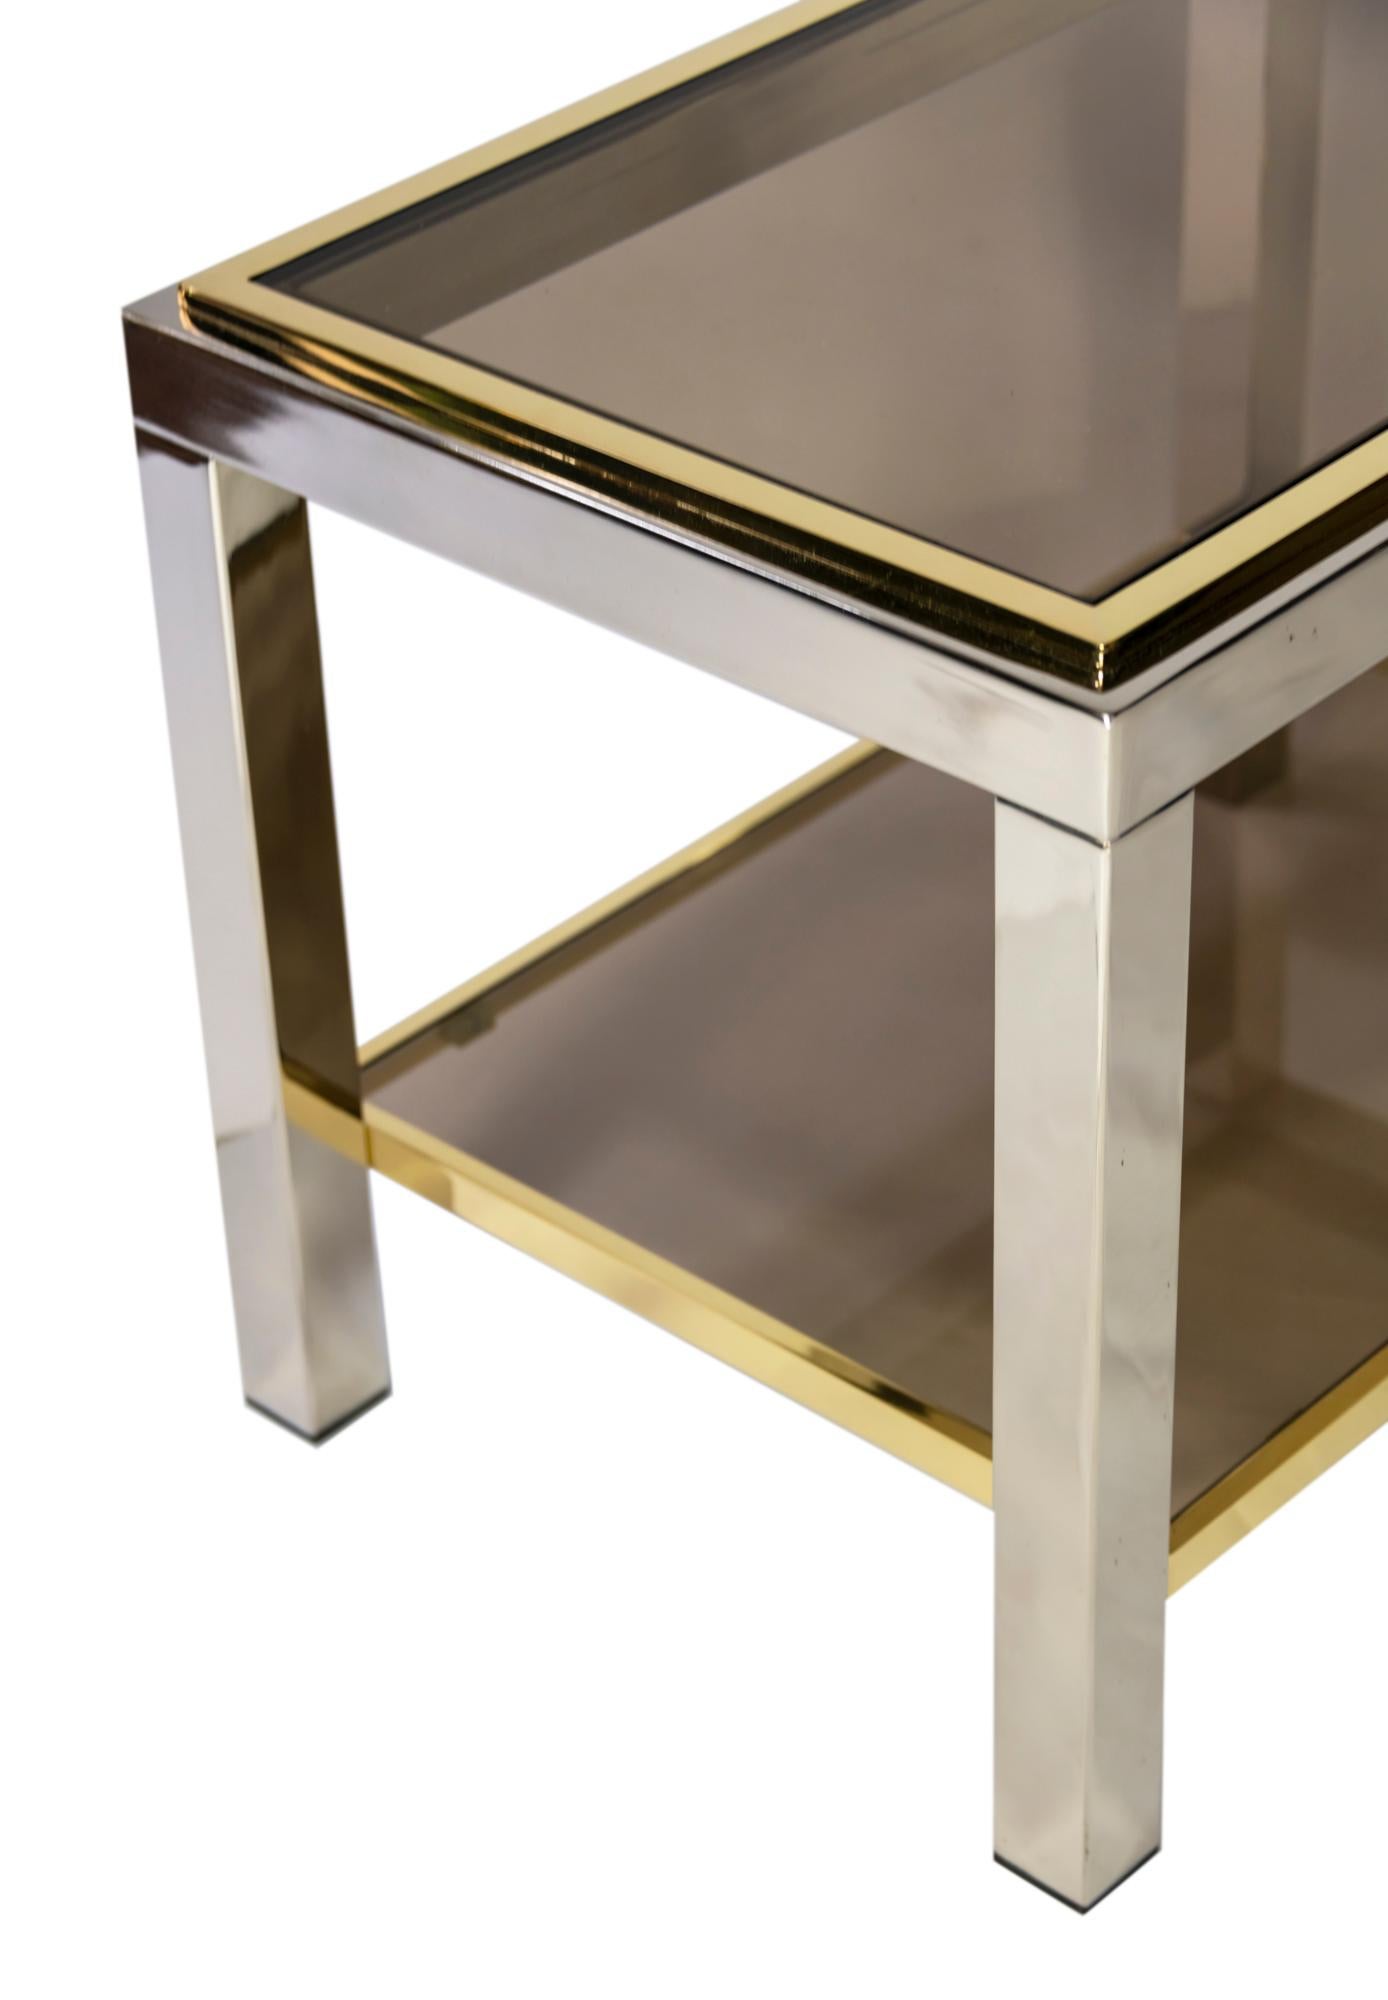 20th Century Pair of Mid-Century Brass, Chrome and Glass Top Side Tables by Willy Rizzo